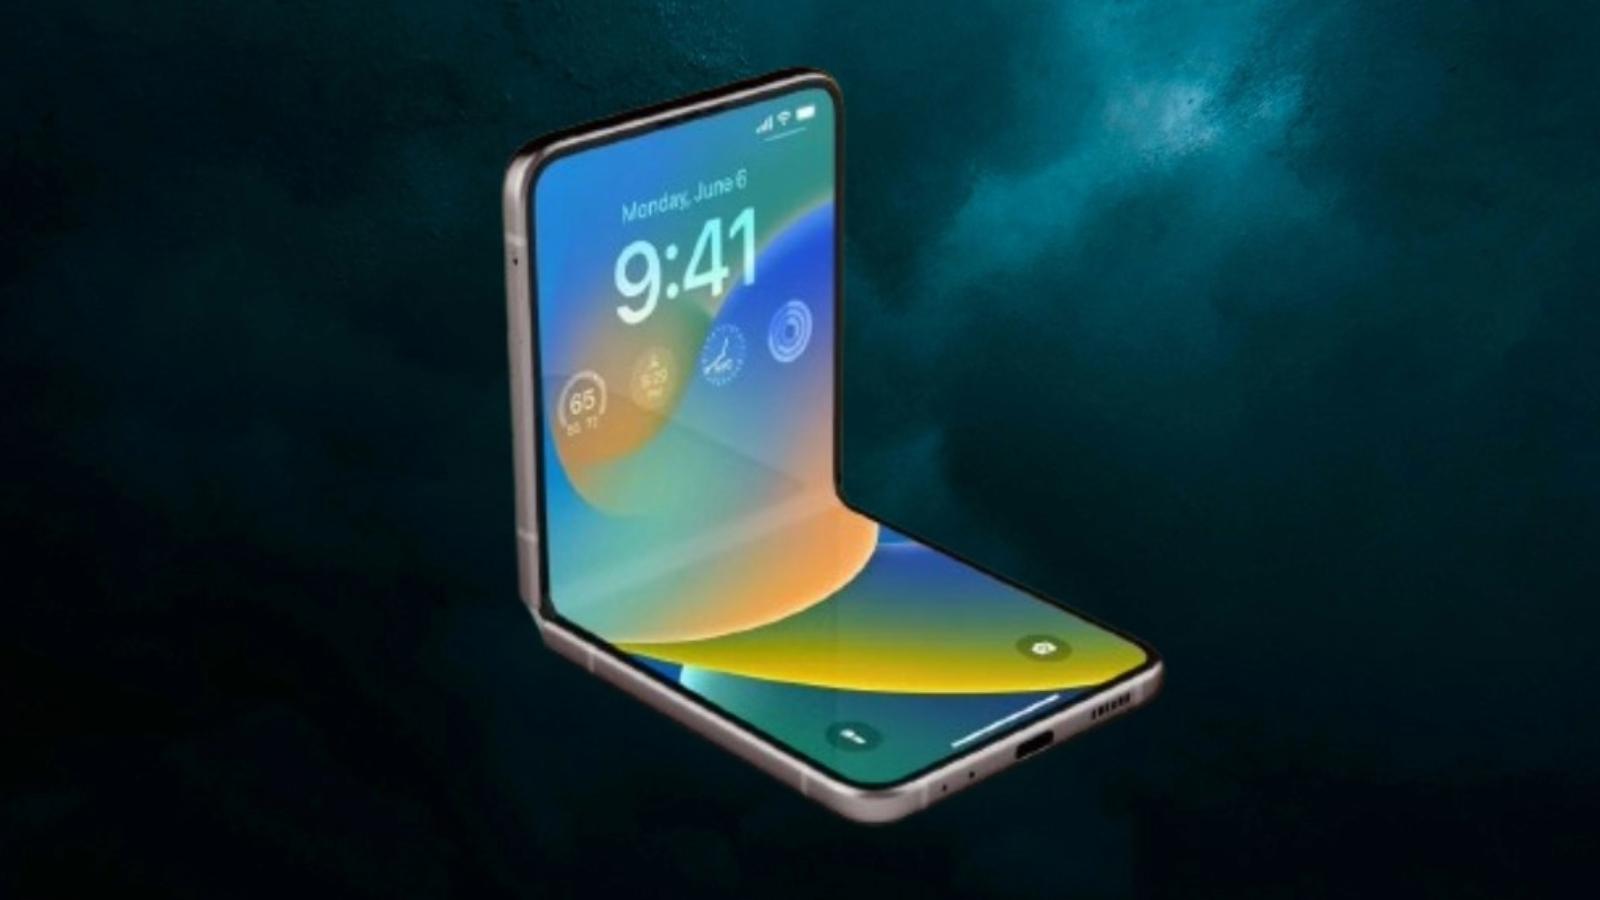 Image showing a foldable device against a dark background